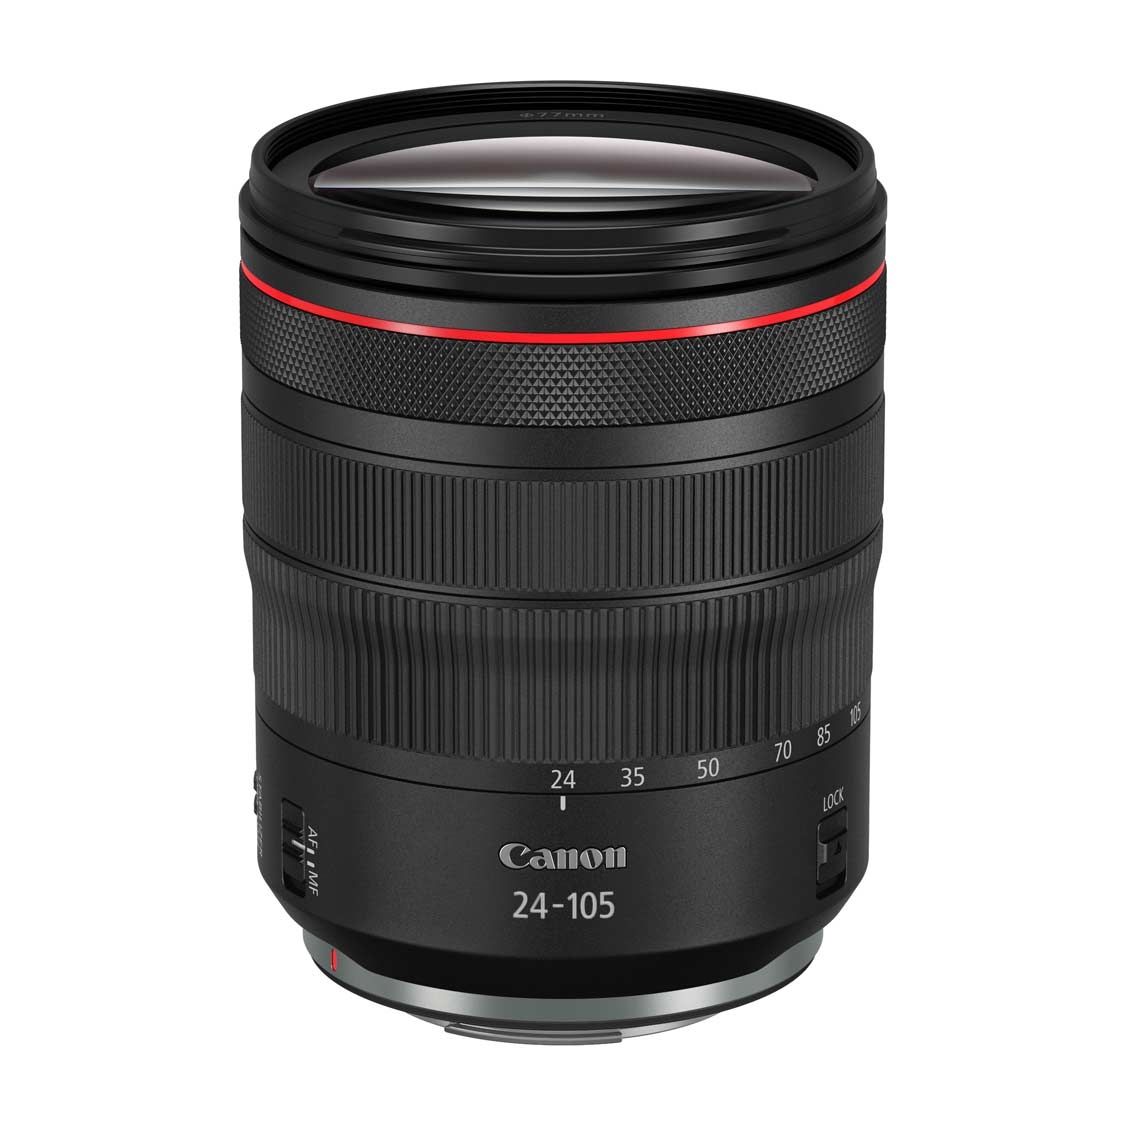 Canon RF 24-105mm f4.0 L IS USM Lens